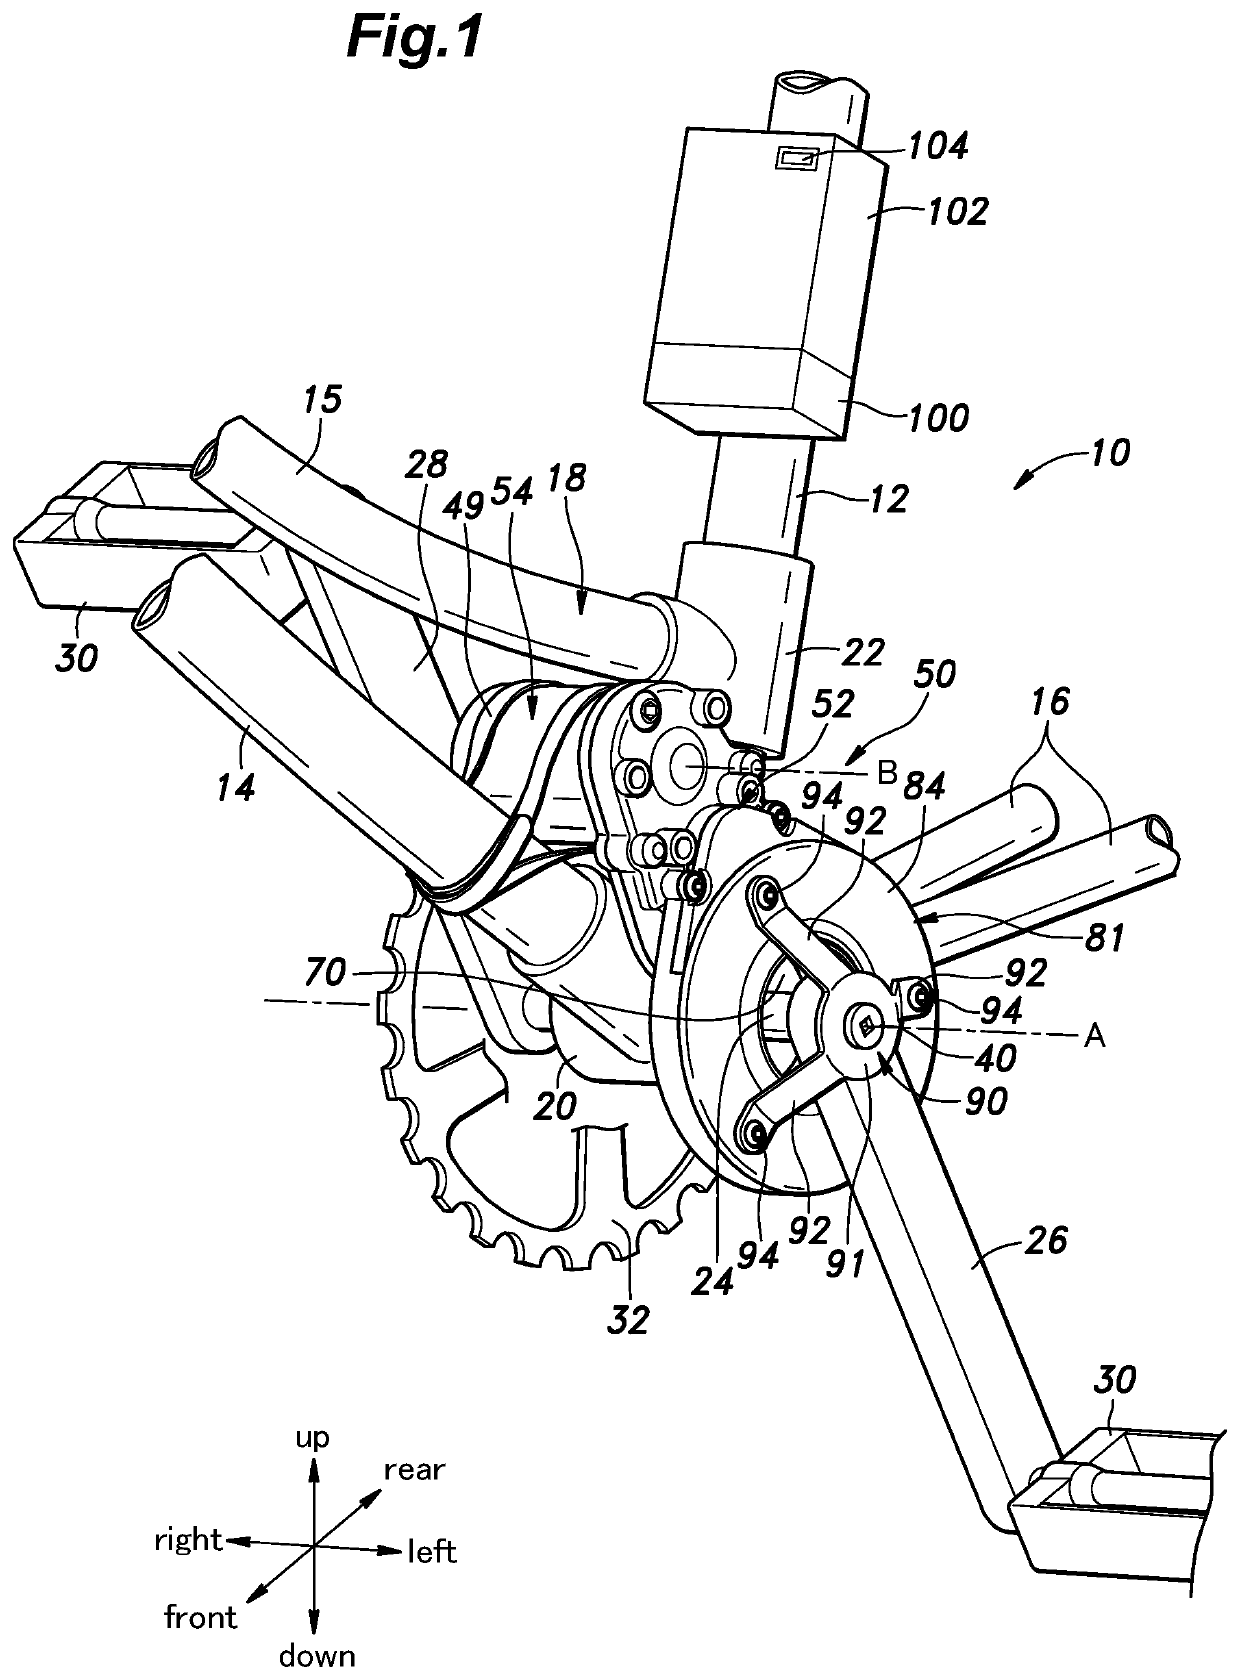 Bicycle exercise measurement device and bicycle